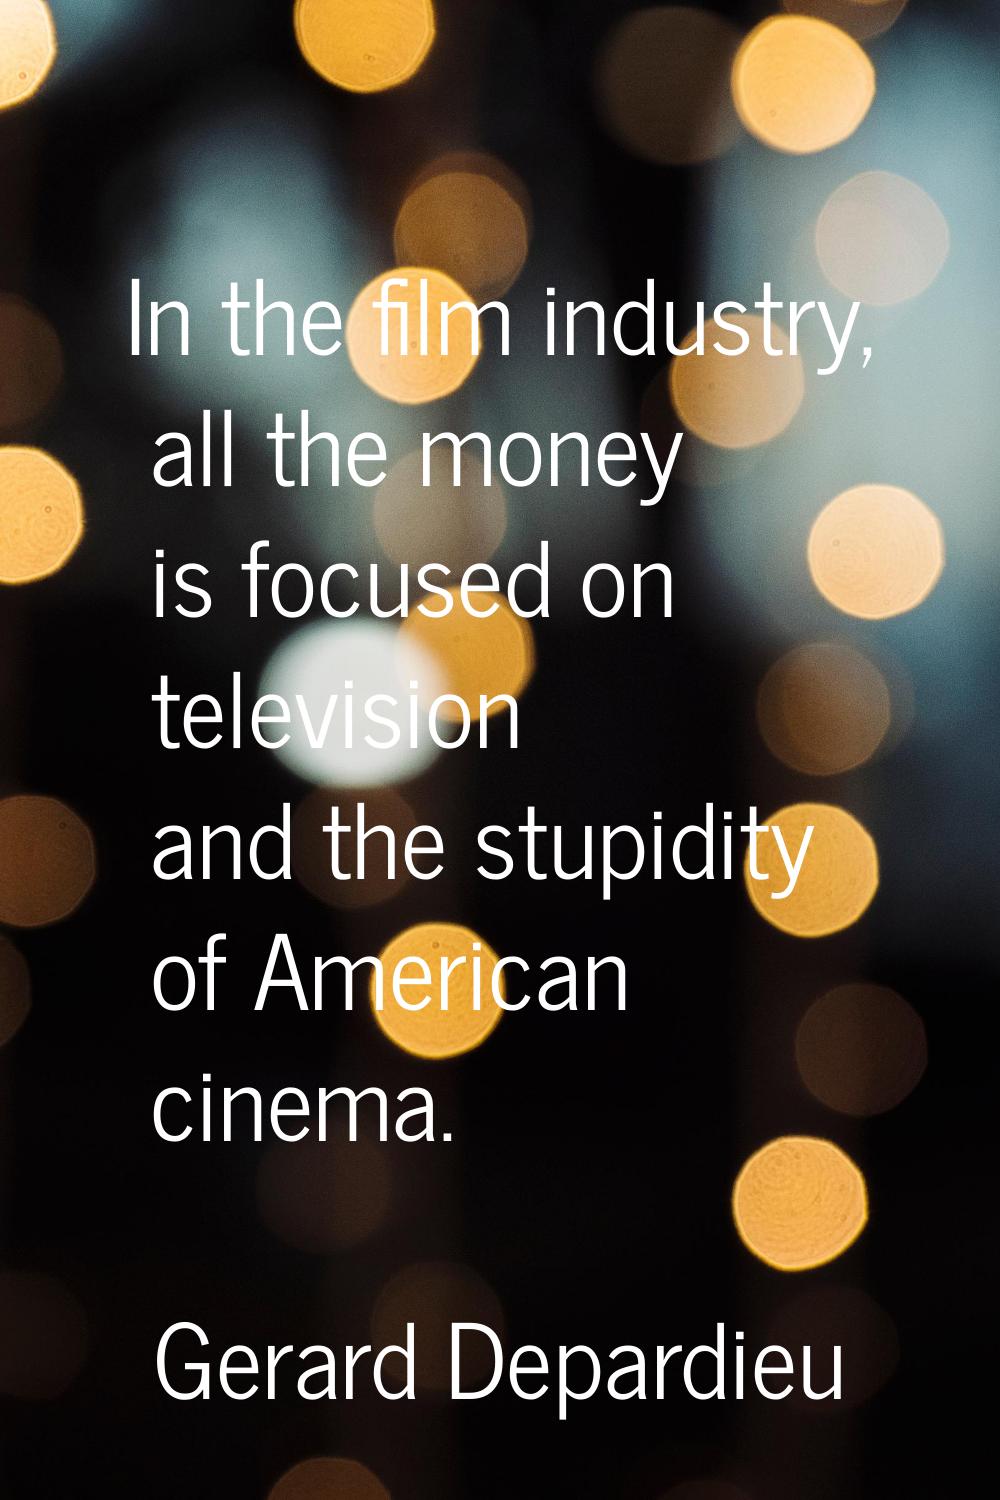 In the film industry, all the money is focused on television and the stupidity of American cinema.